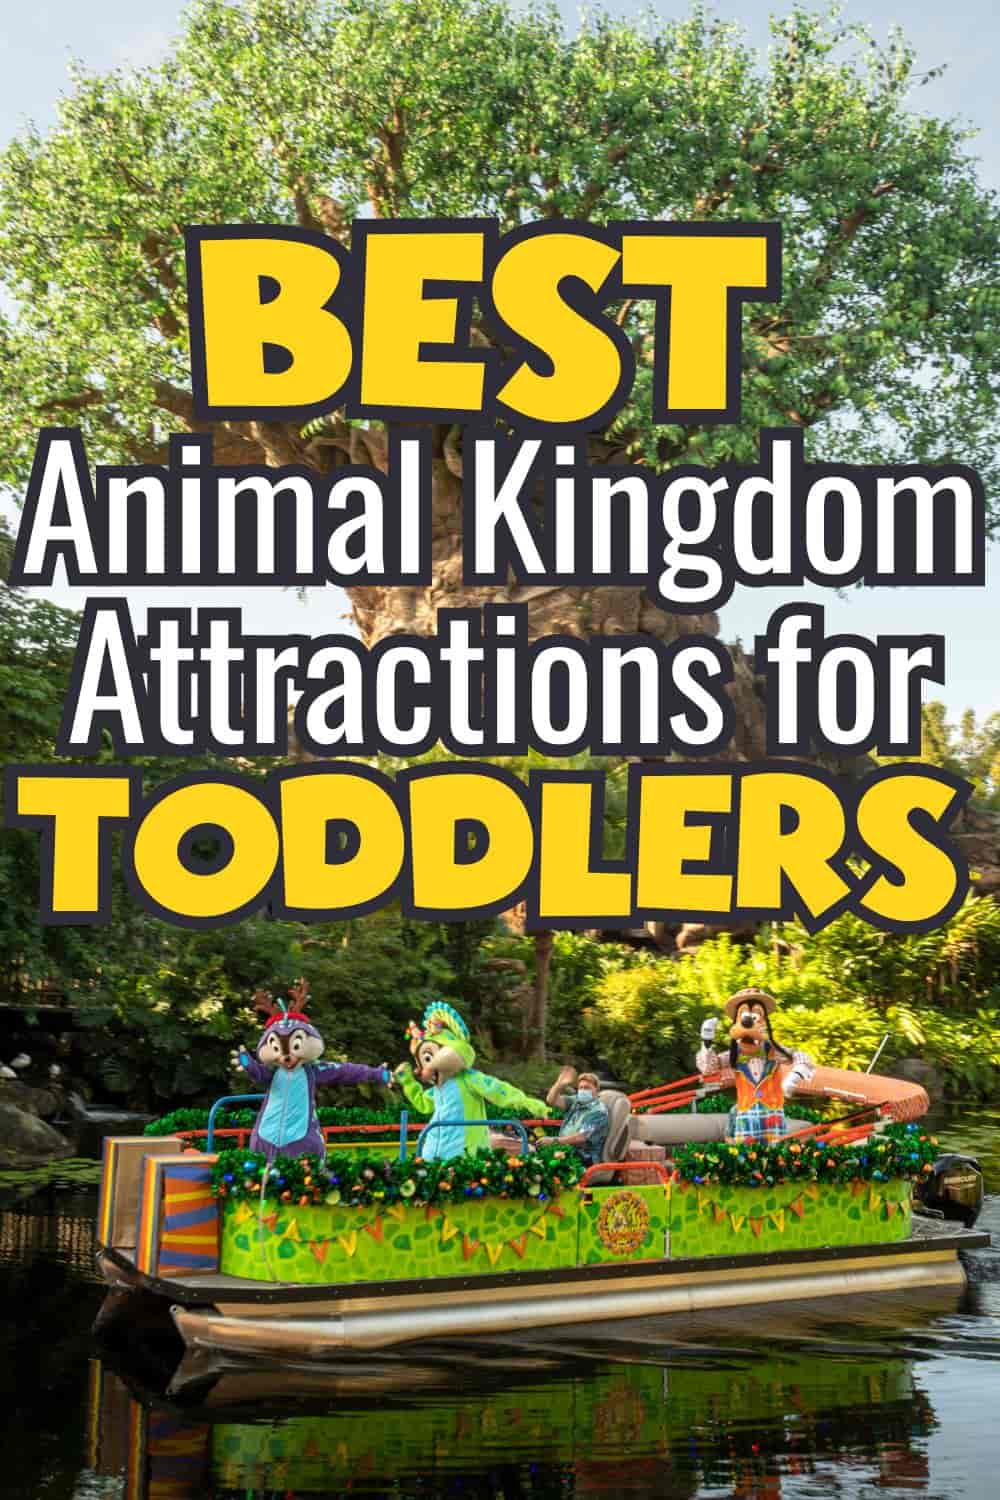 Best Animal Kingdom Attractions for Toddlers